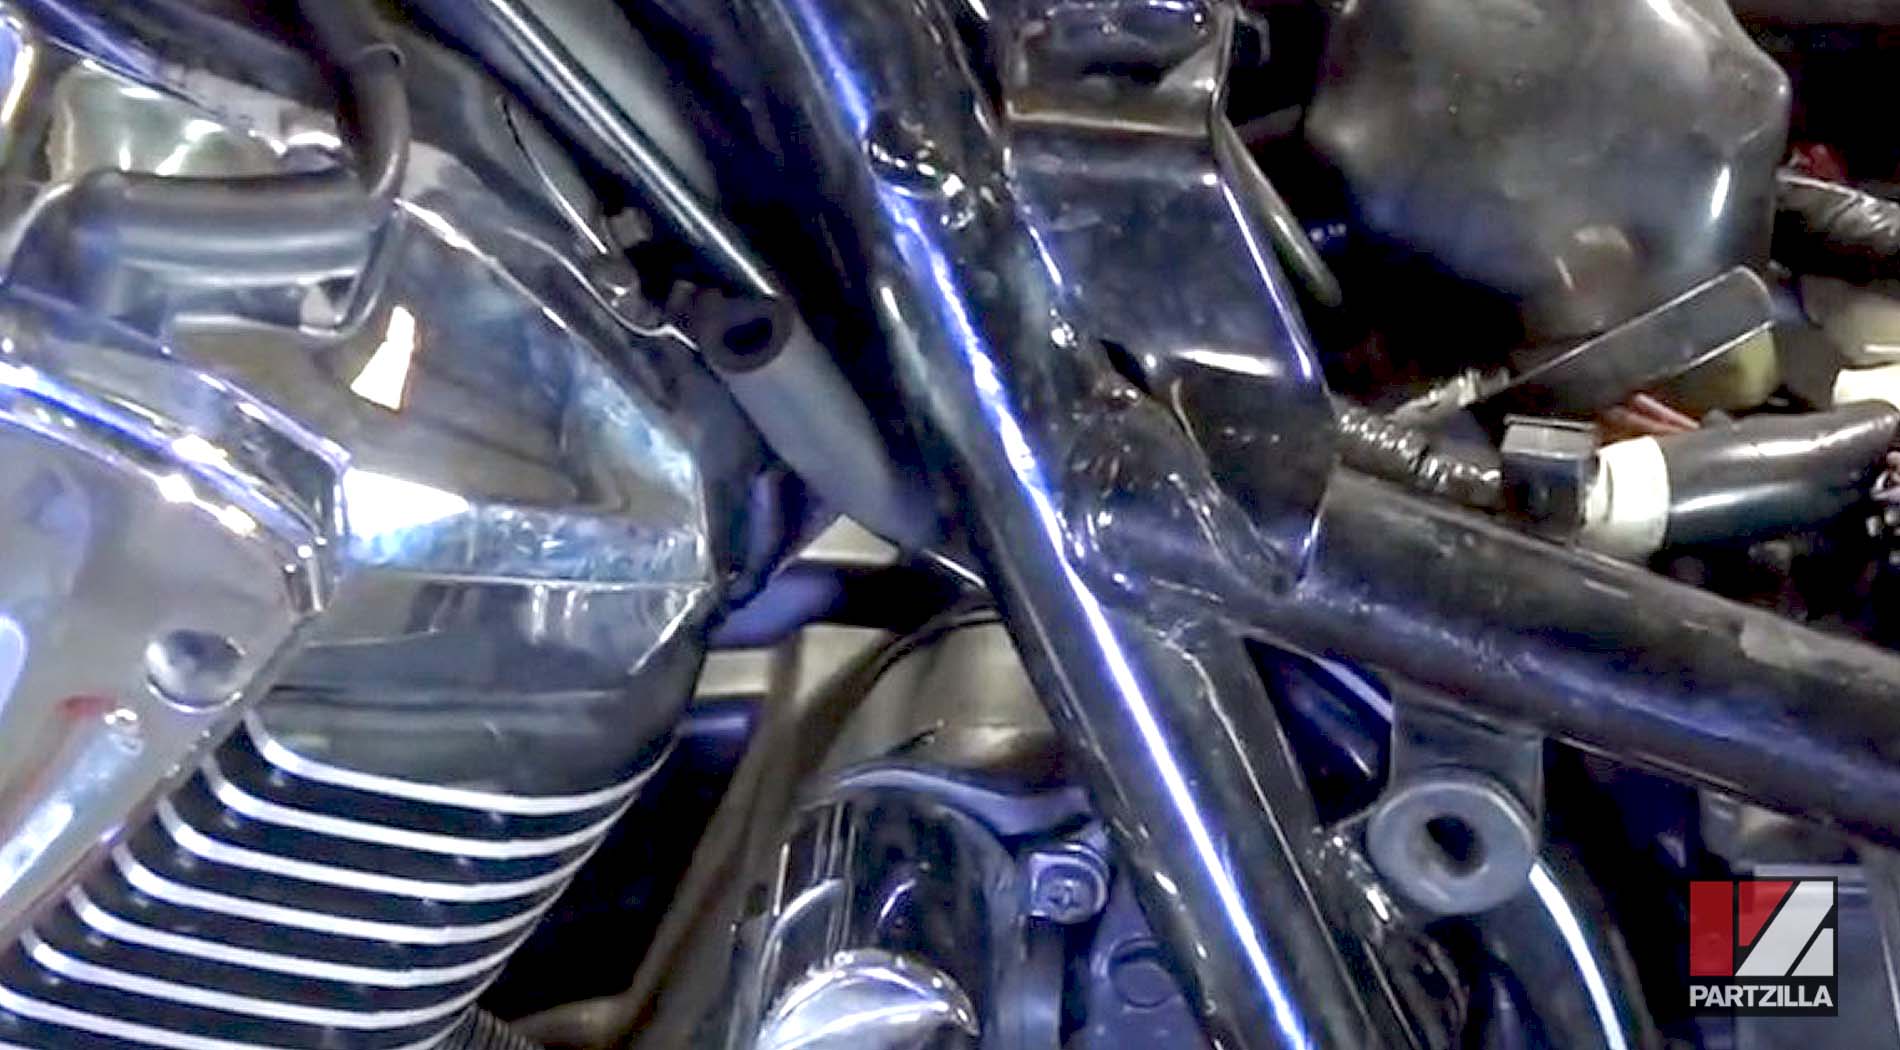 How to change Honda motorcycle fuel line